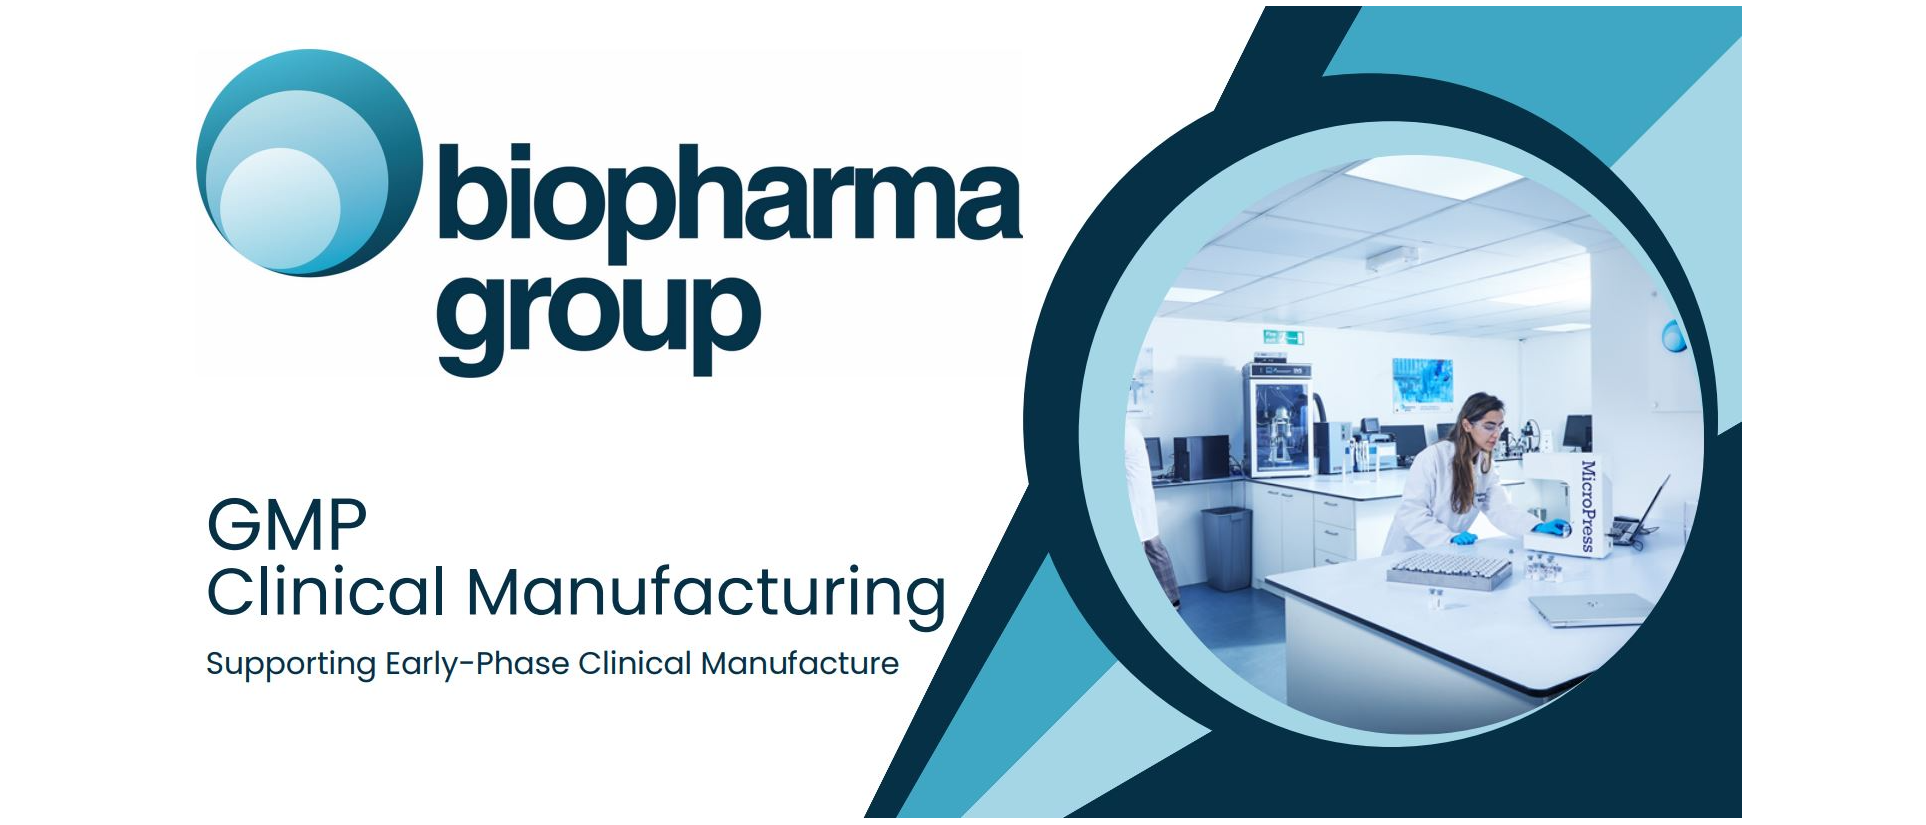 GMP Clinical Manufacturing Services Overview